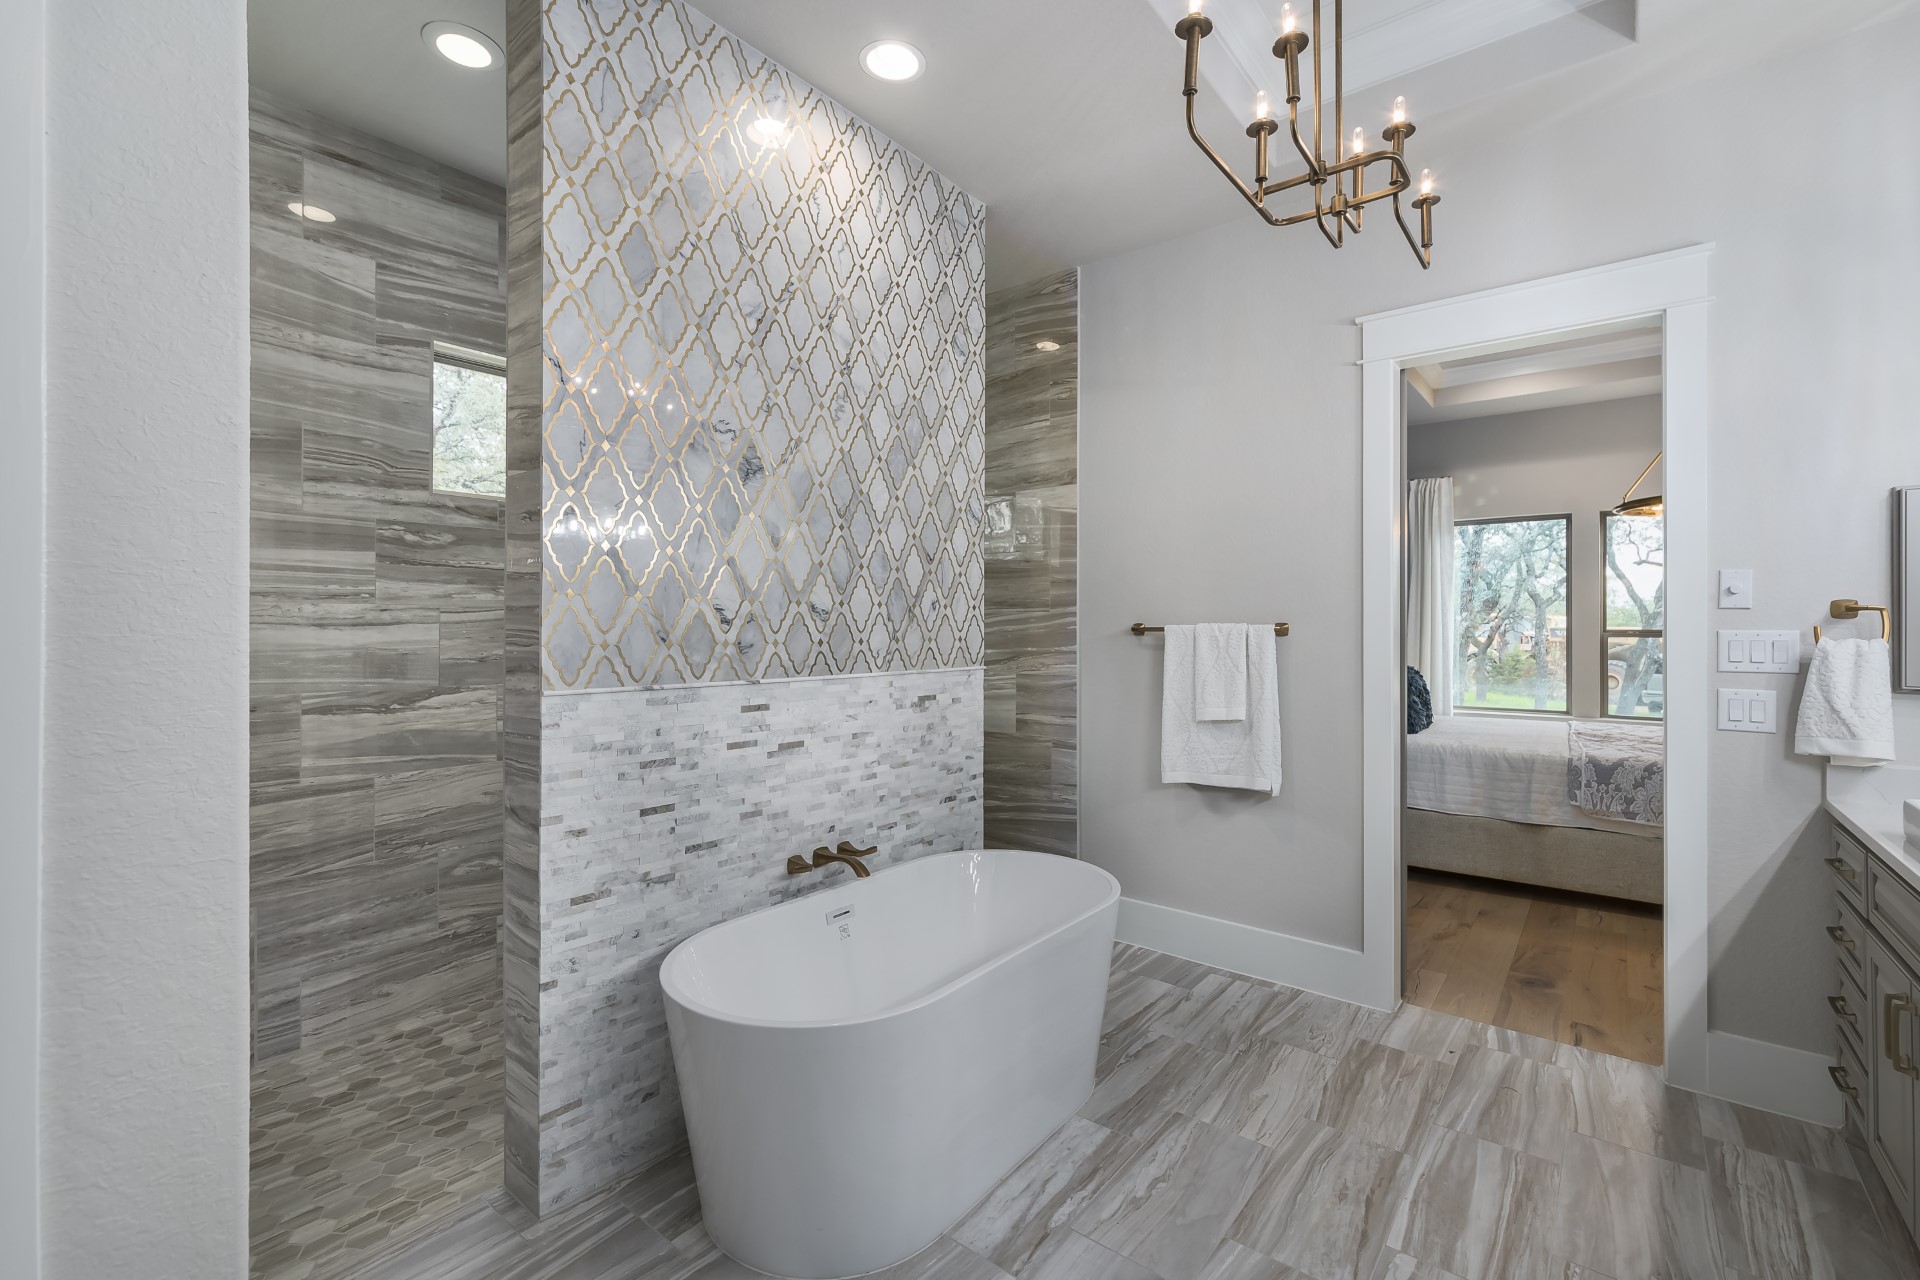 A side view of the bathroom area within the Belle Oaks custom floor plan from JLP Builders